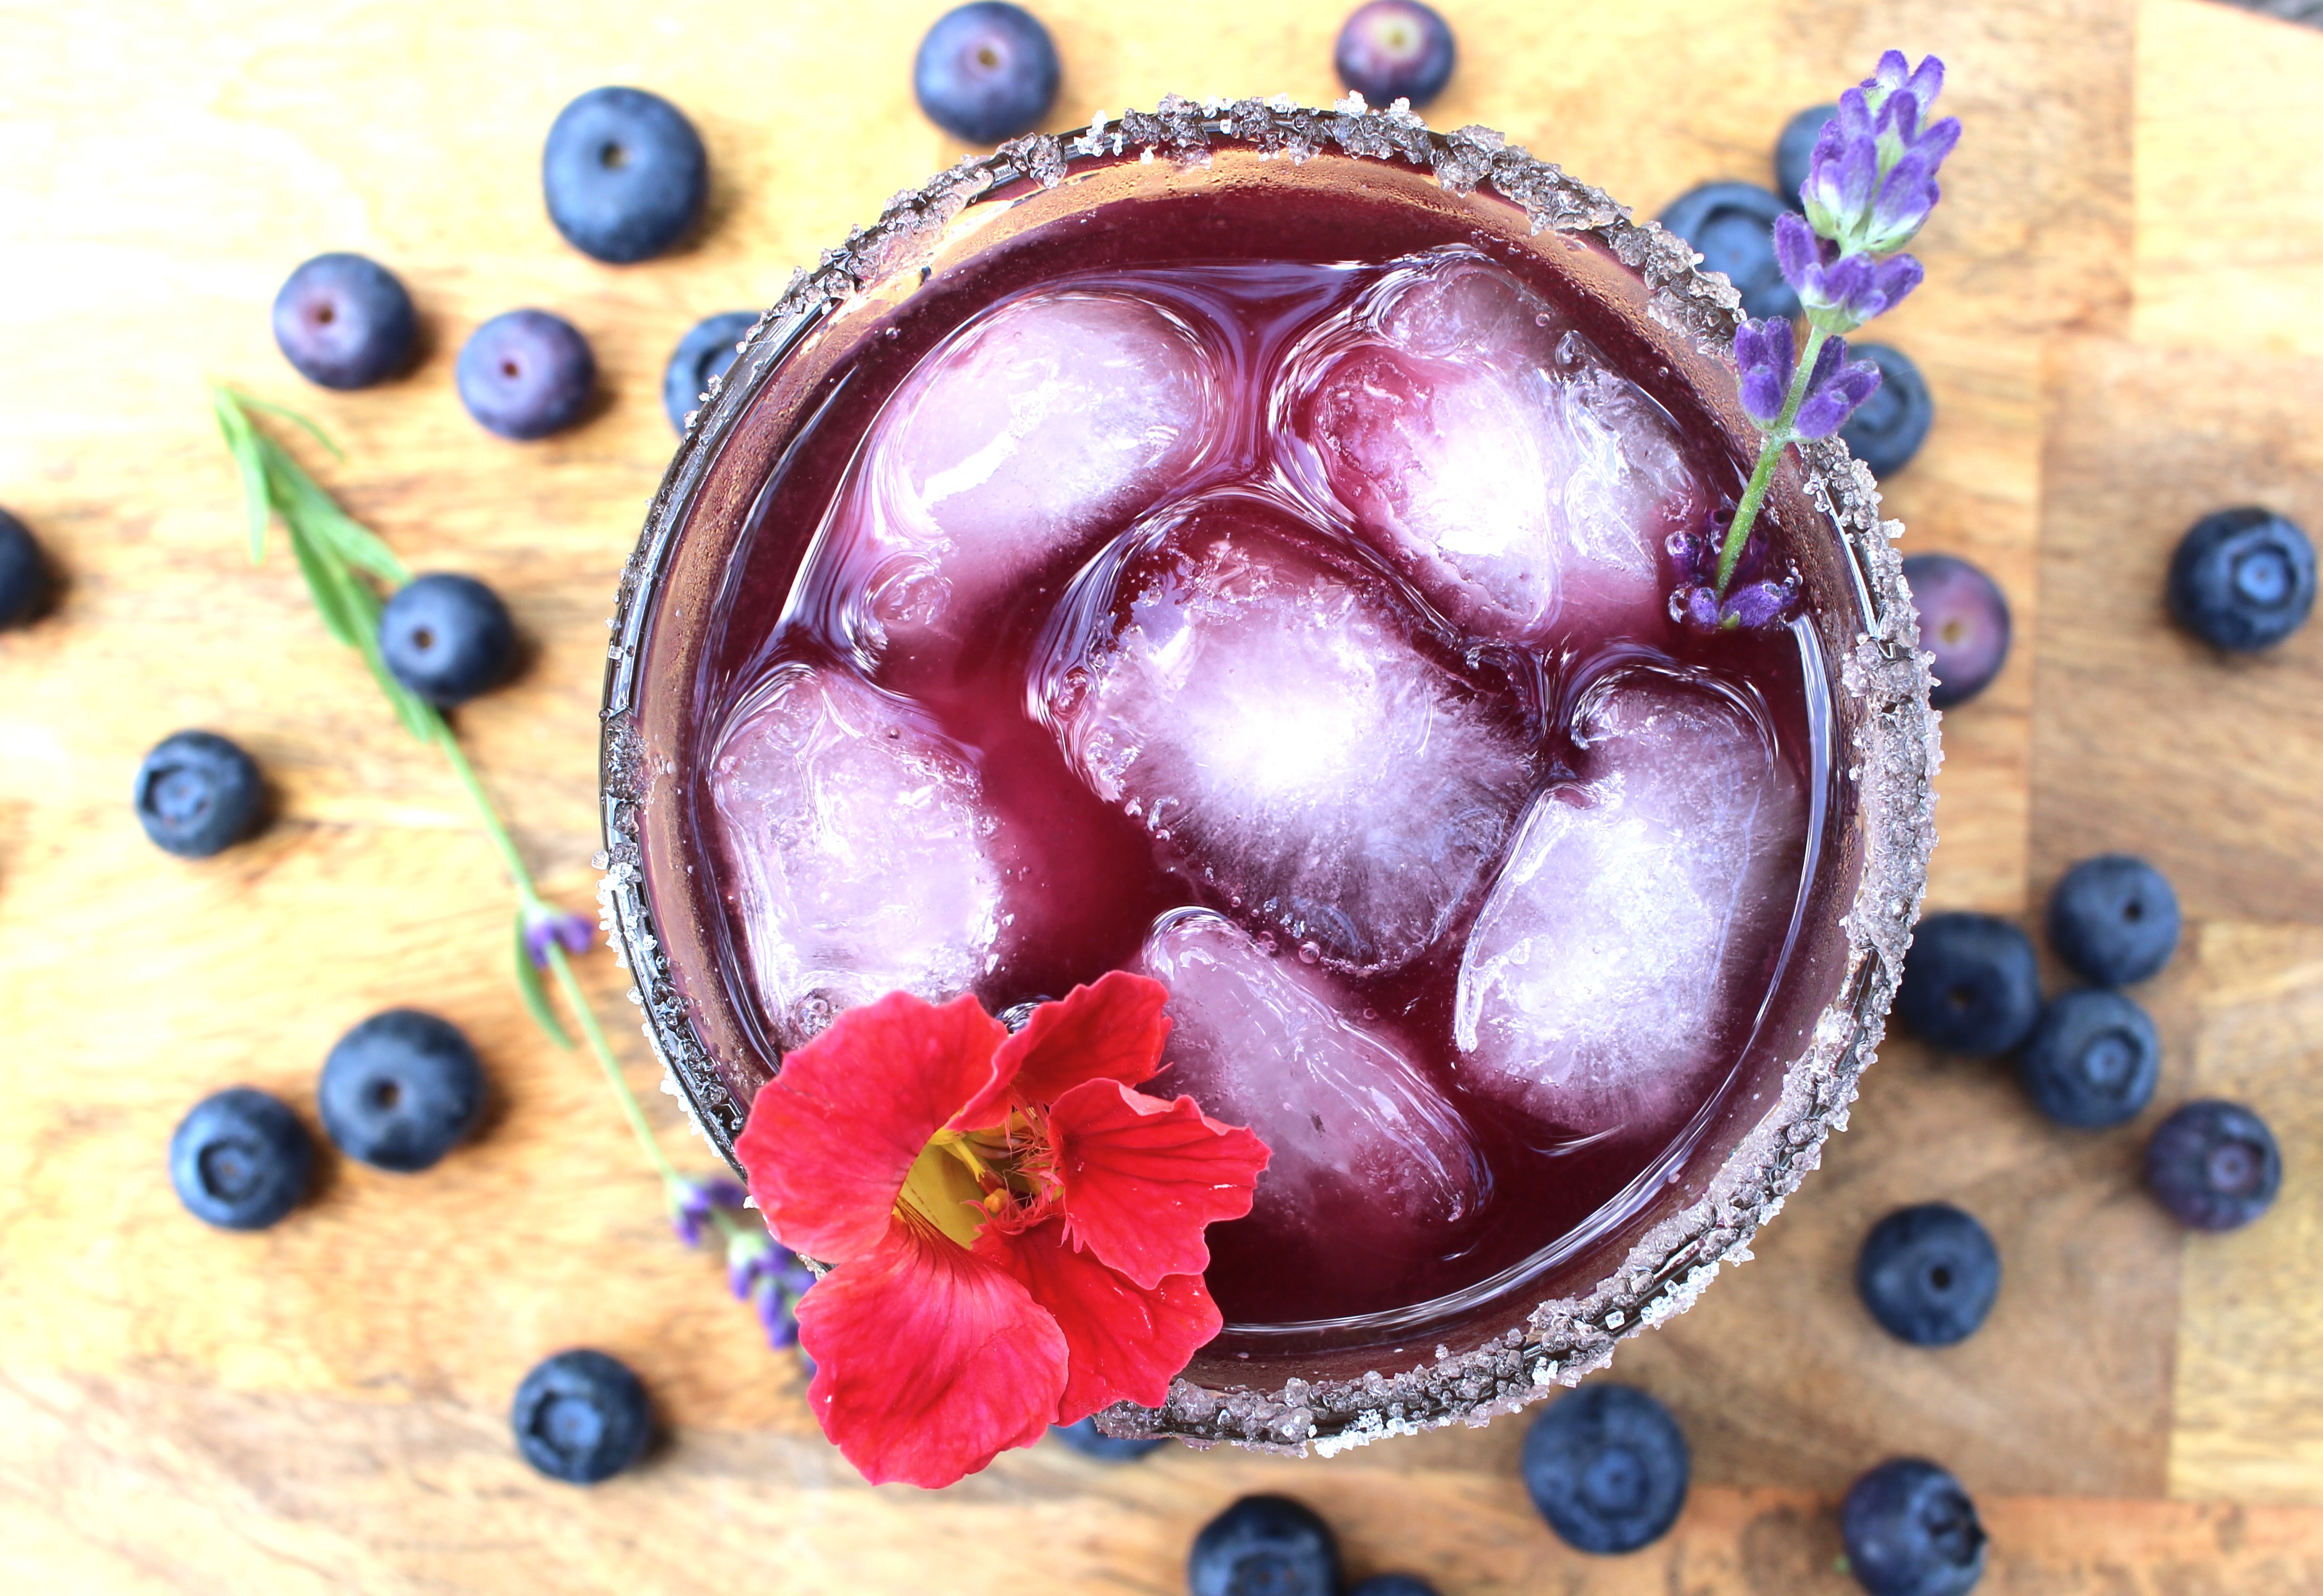 Blueberry Infused Gin - Stephanie Thurow